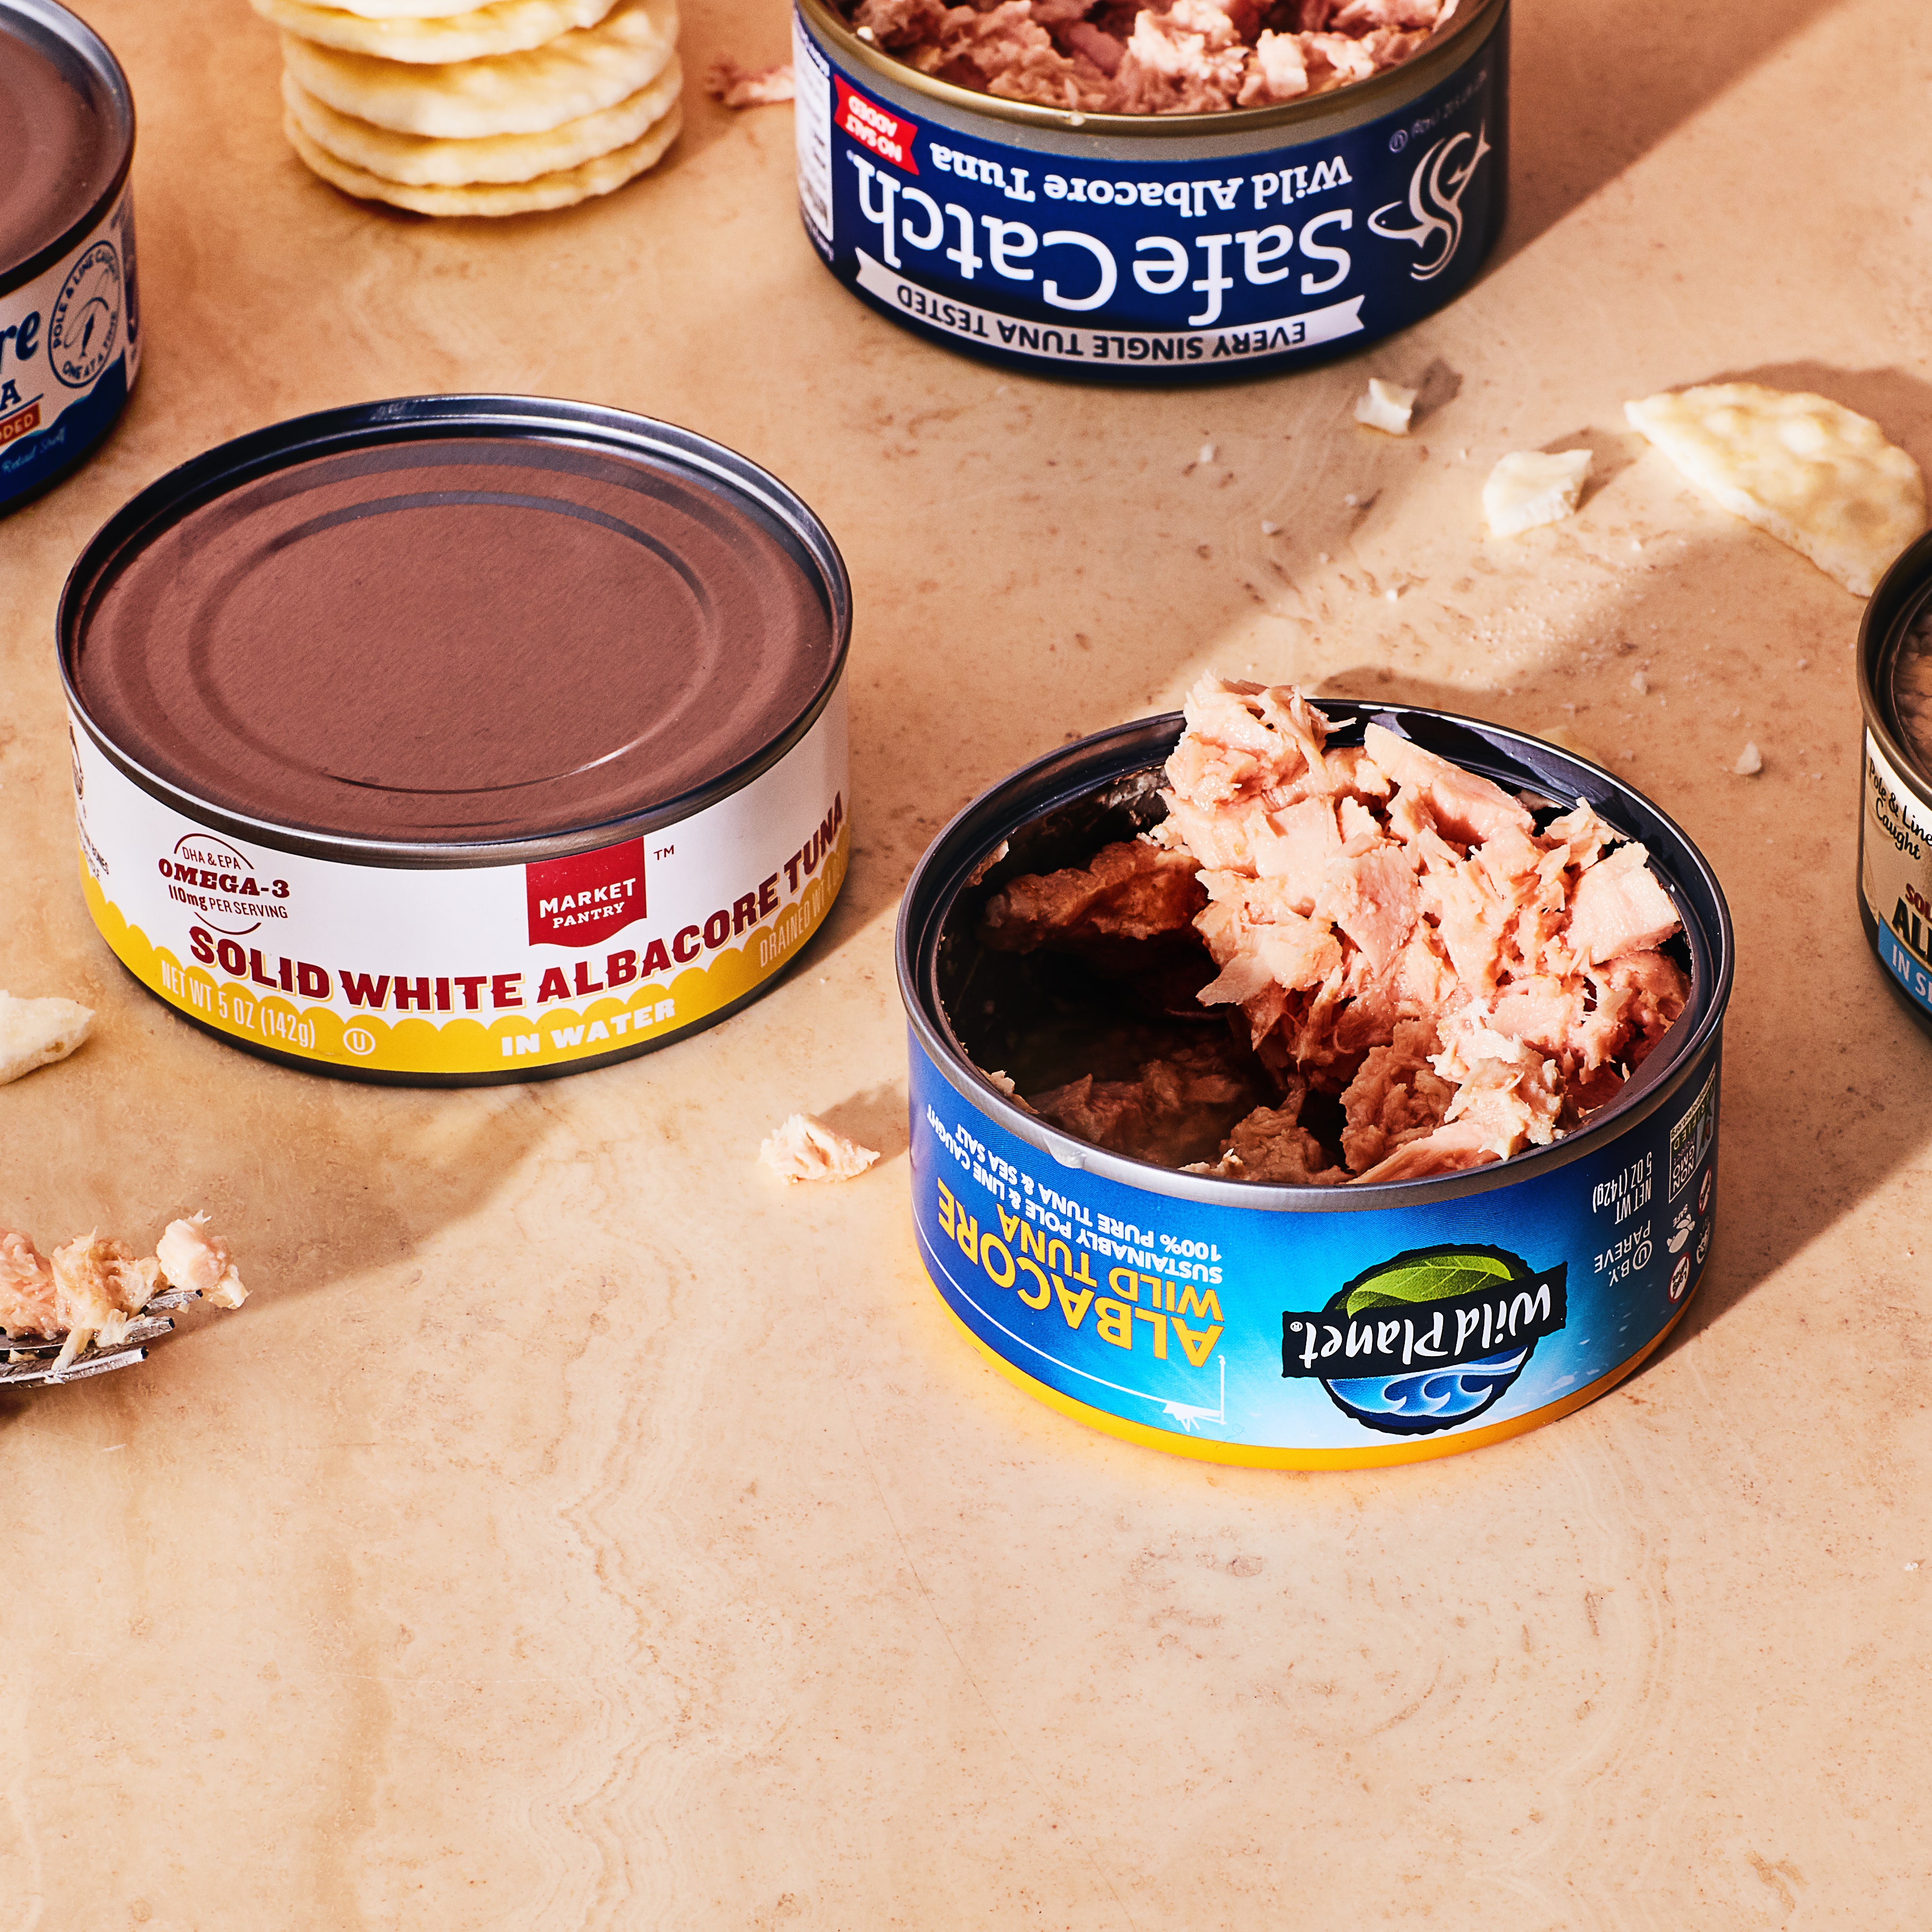 When at self-checkout, scan the store brand tuna while filling your bags with the brand name stuff of the same weight.